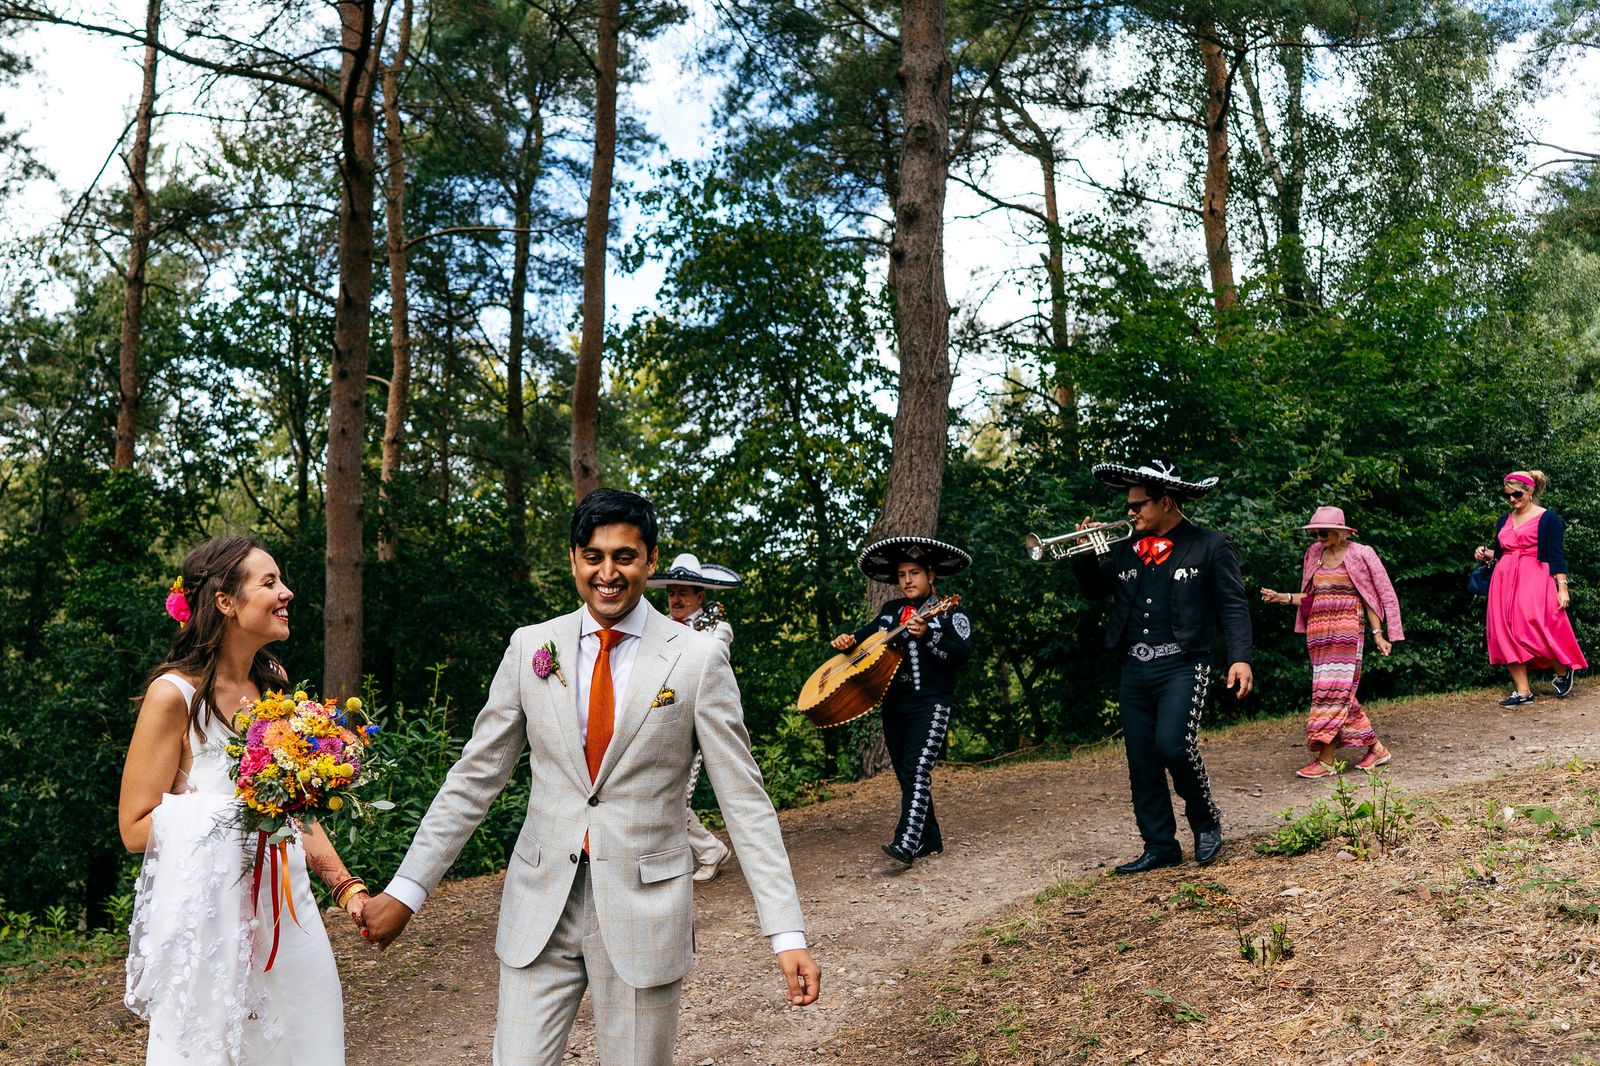 Newlyweds dance down the path at Hestercombe Gardens with musicians